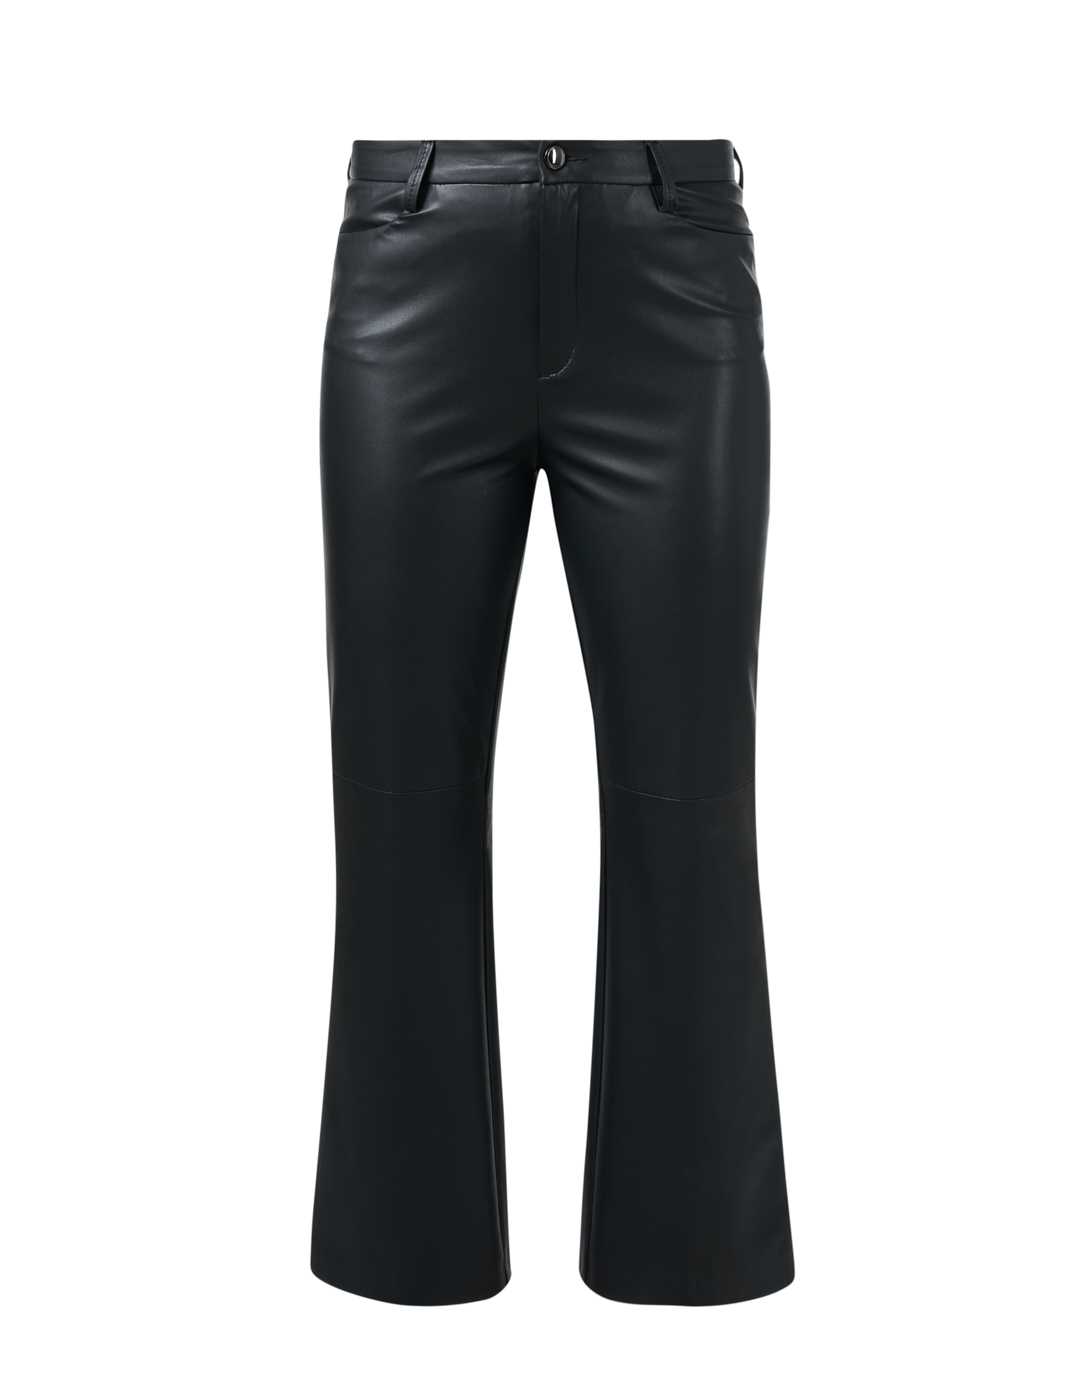 Staying Trendy Faux Leather Flare Pants (Black)